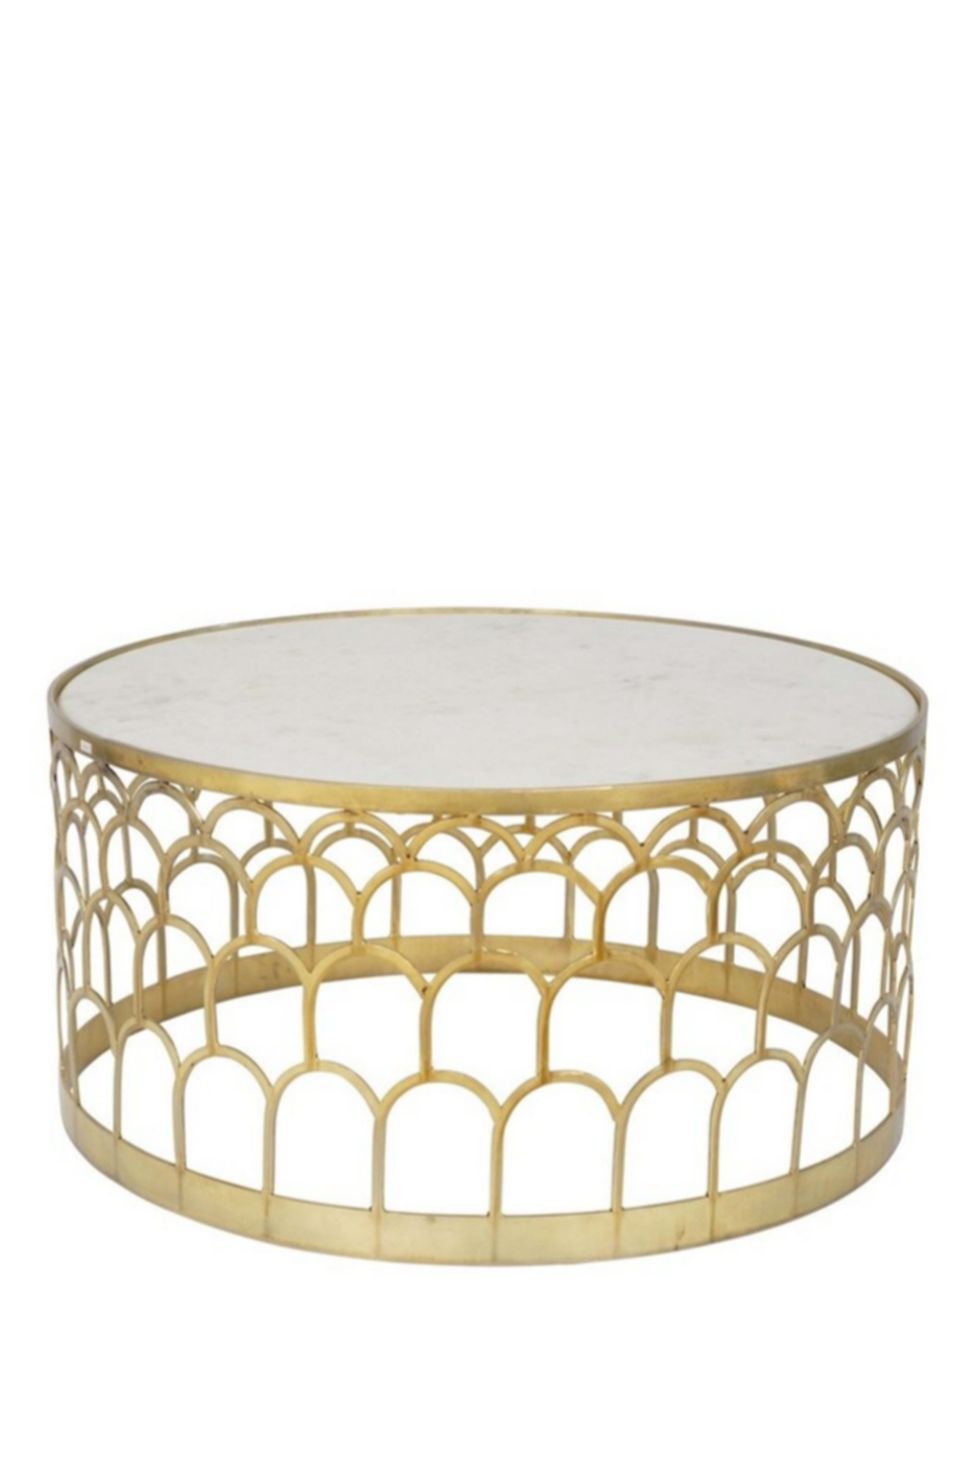 10 Gorgeous Art Deco Coffee Tables - Beautiful Art Deco Tables